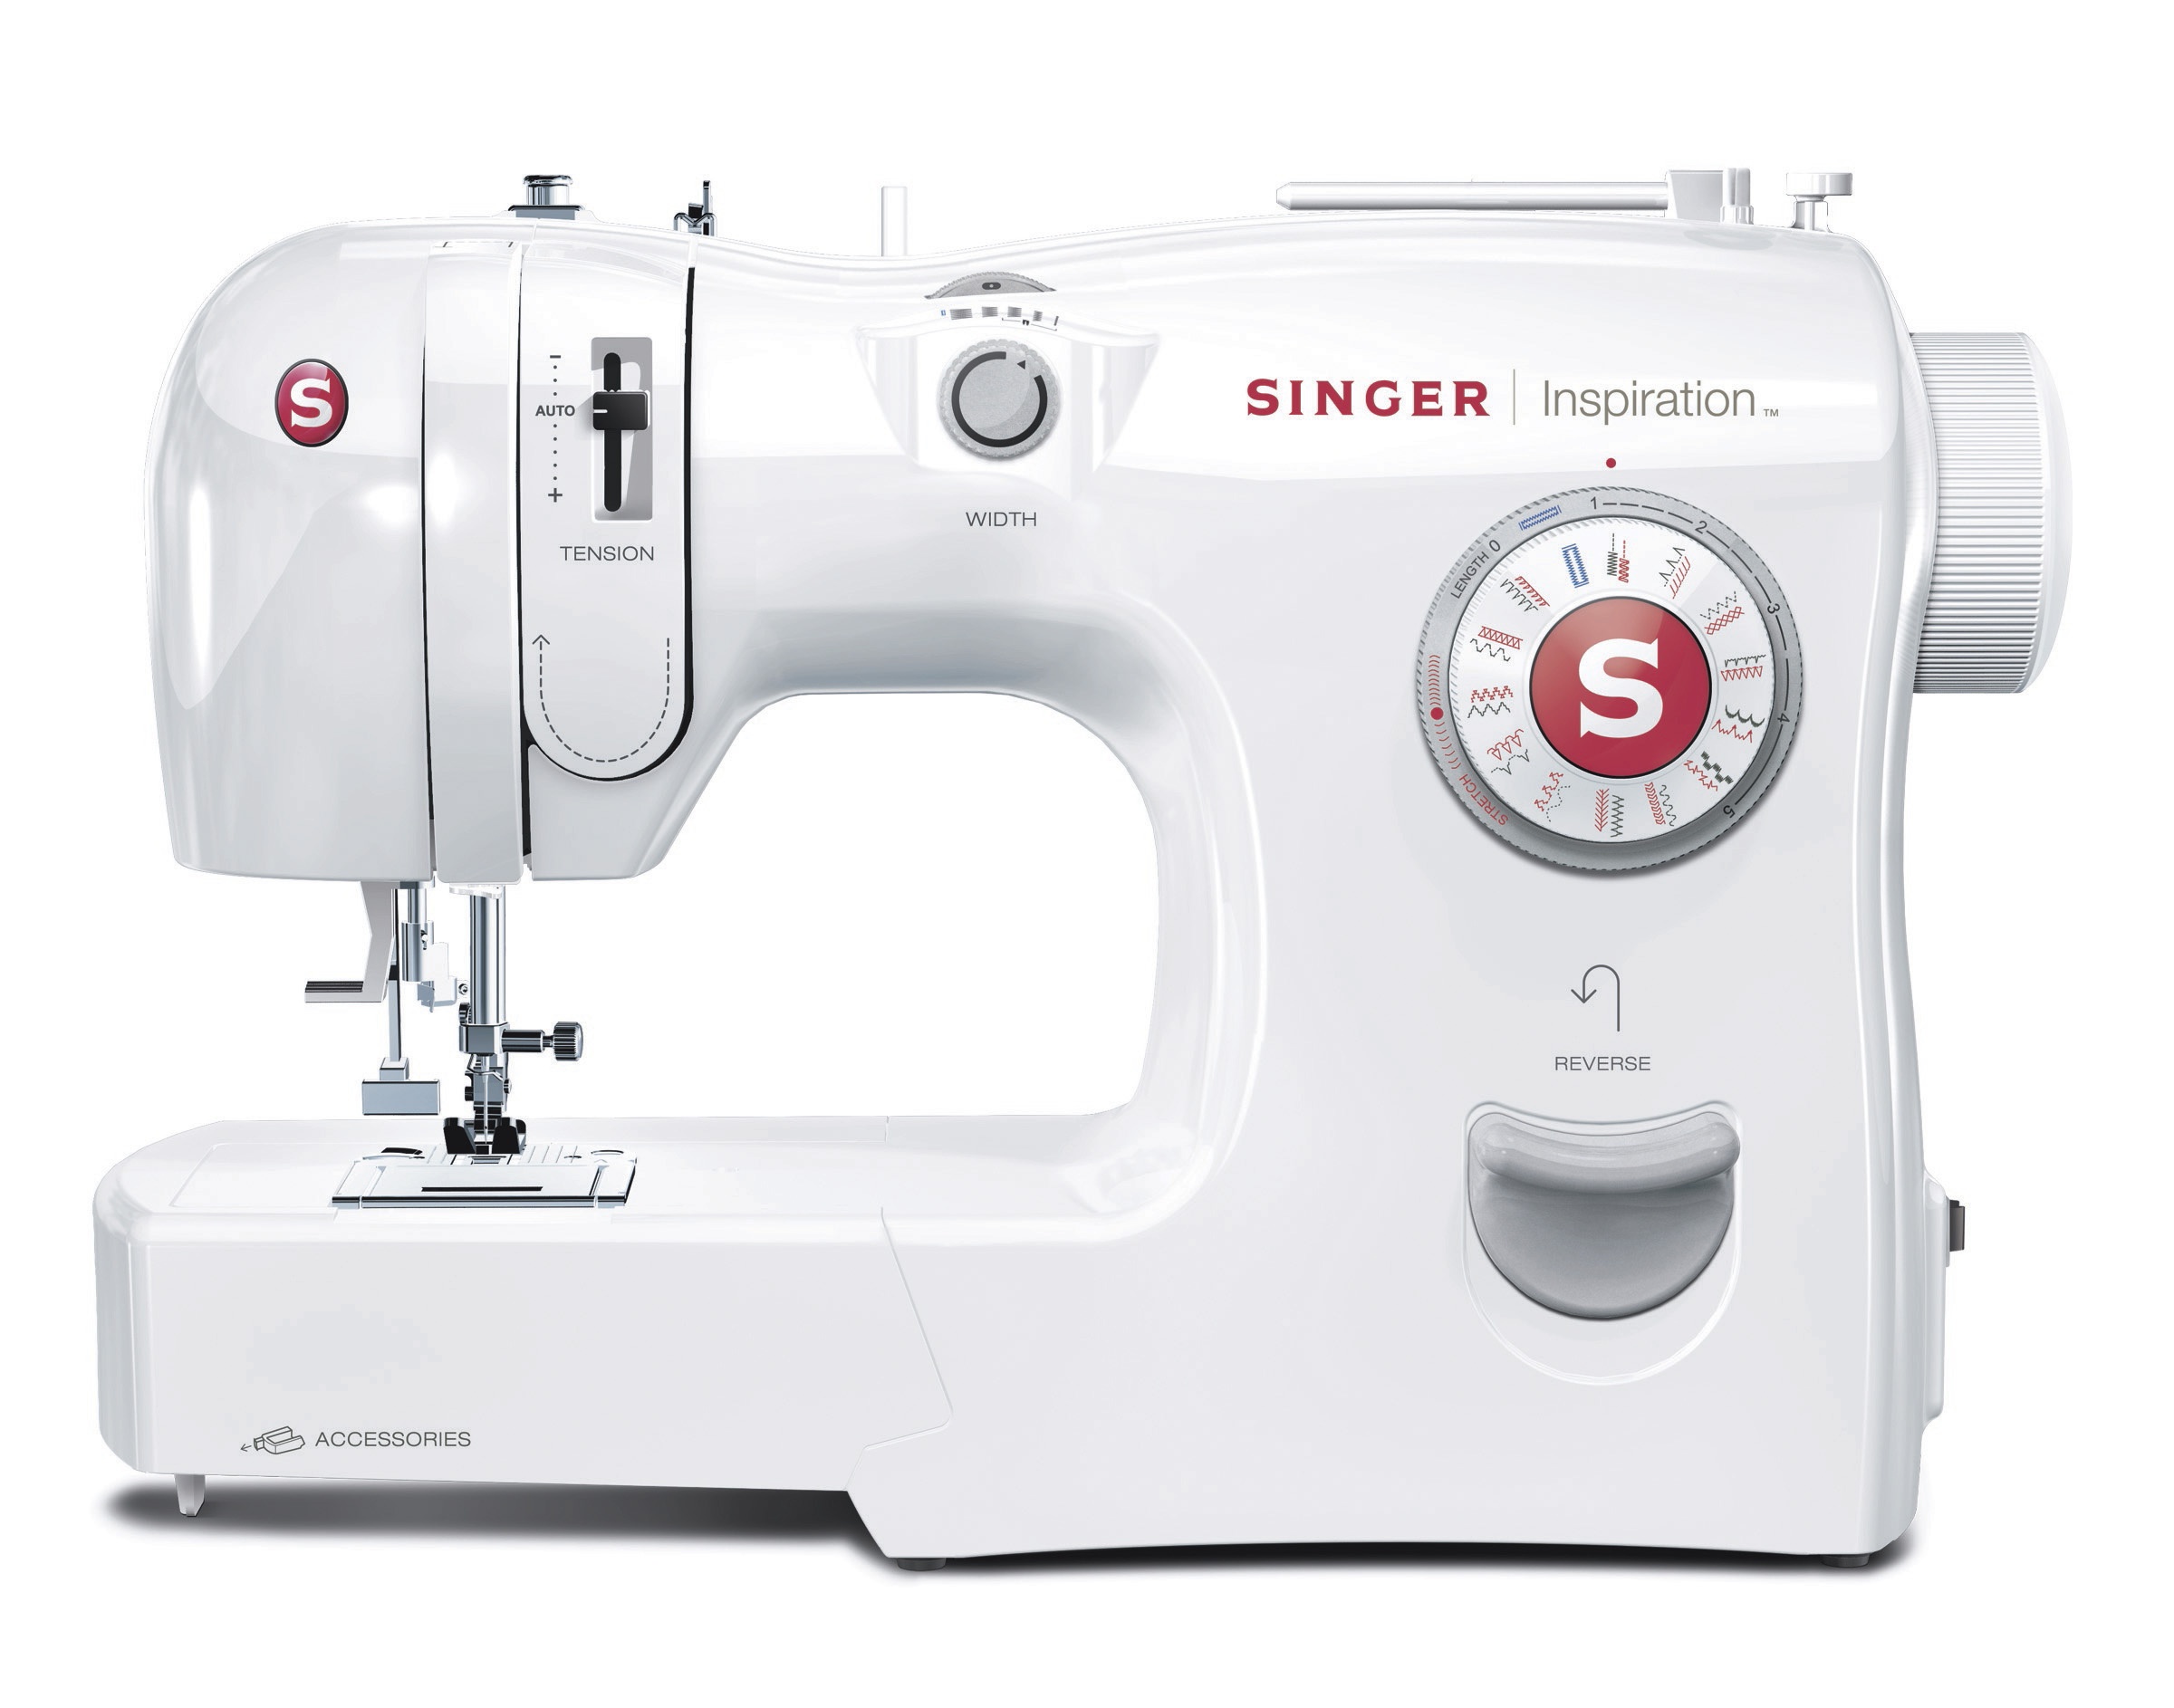 The New Singer Inspirationtm Sewing Machines Simplify Sewing For